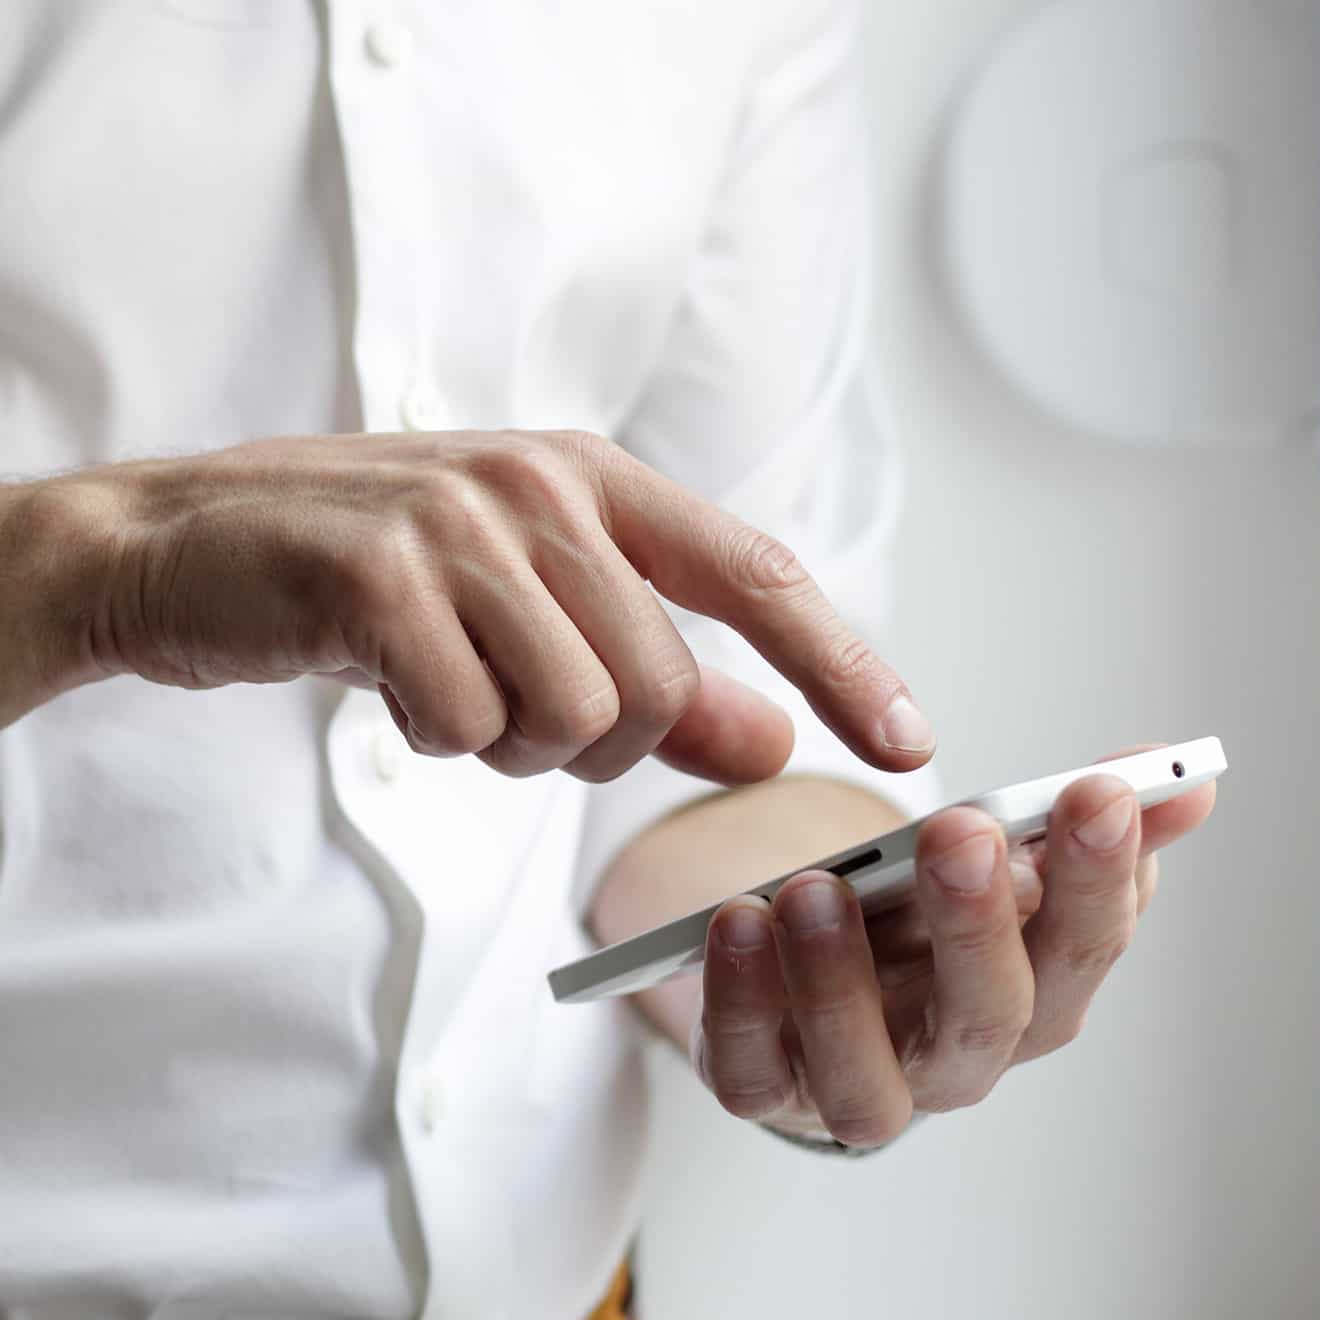 5 Employee Mobile Usage Statistics Your Company Can’t Ignore